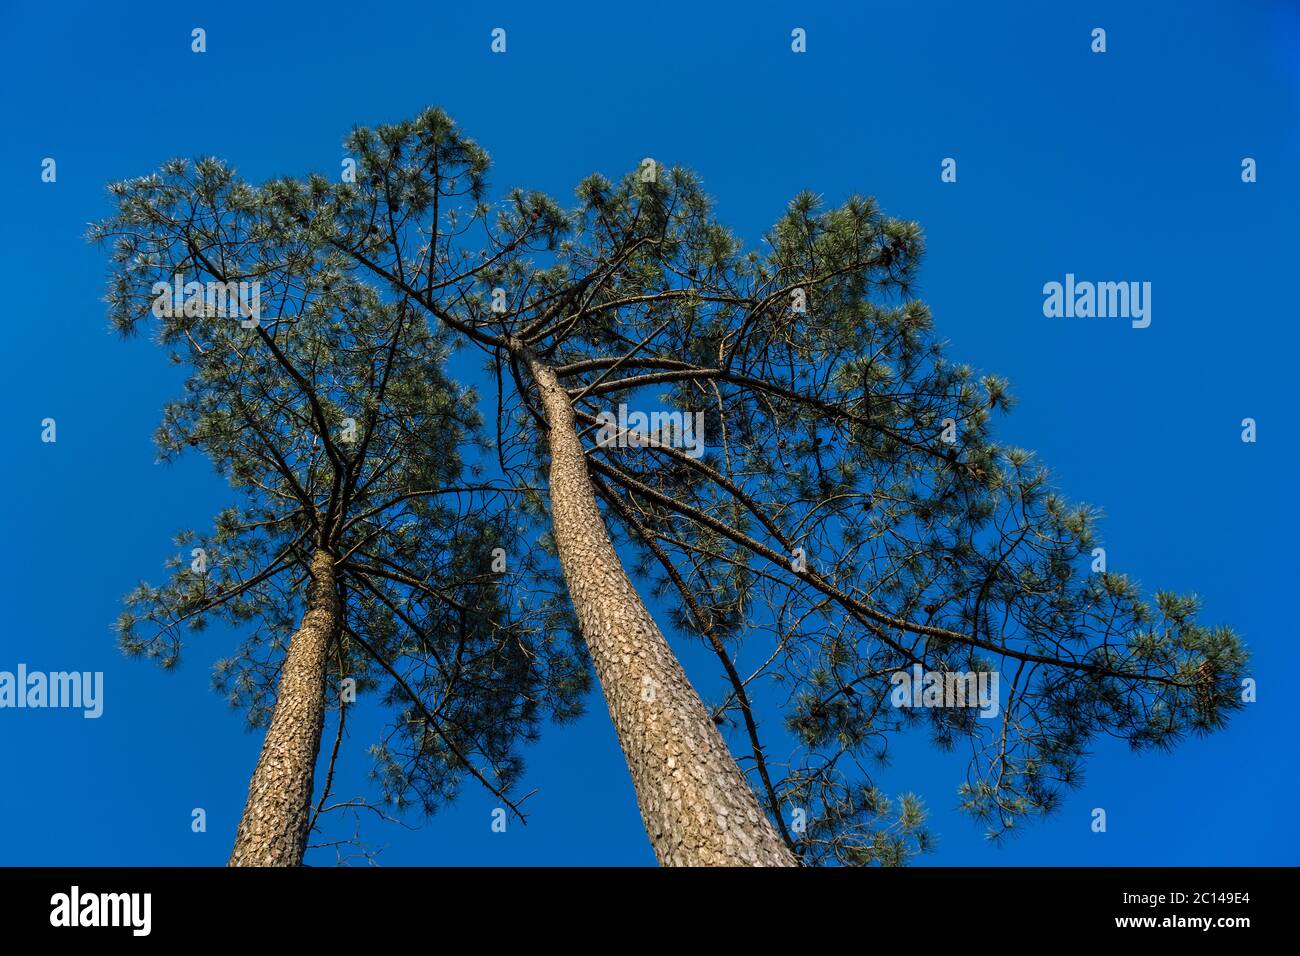 Worms-eye view of two pine trees against blue sky. Stock Photo